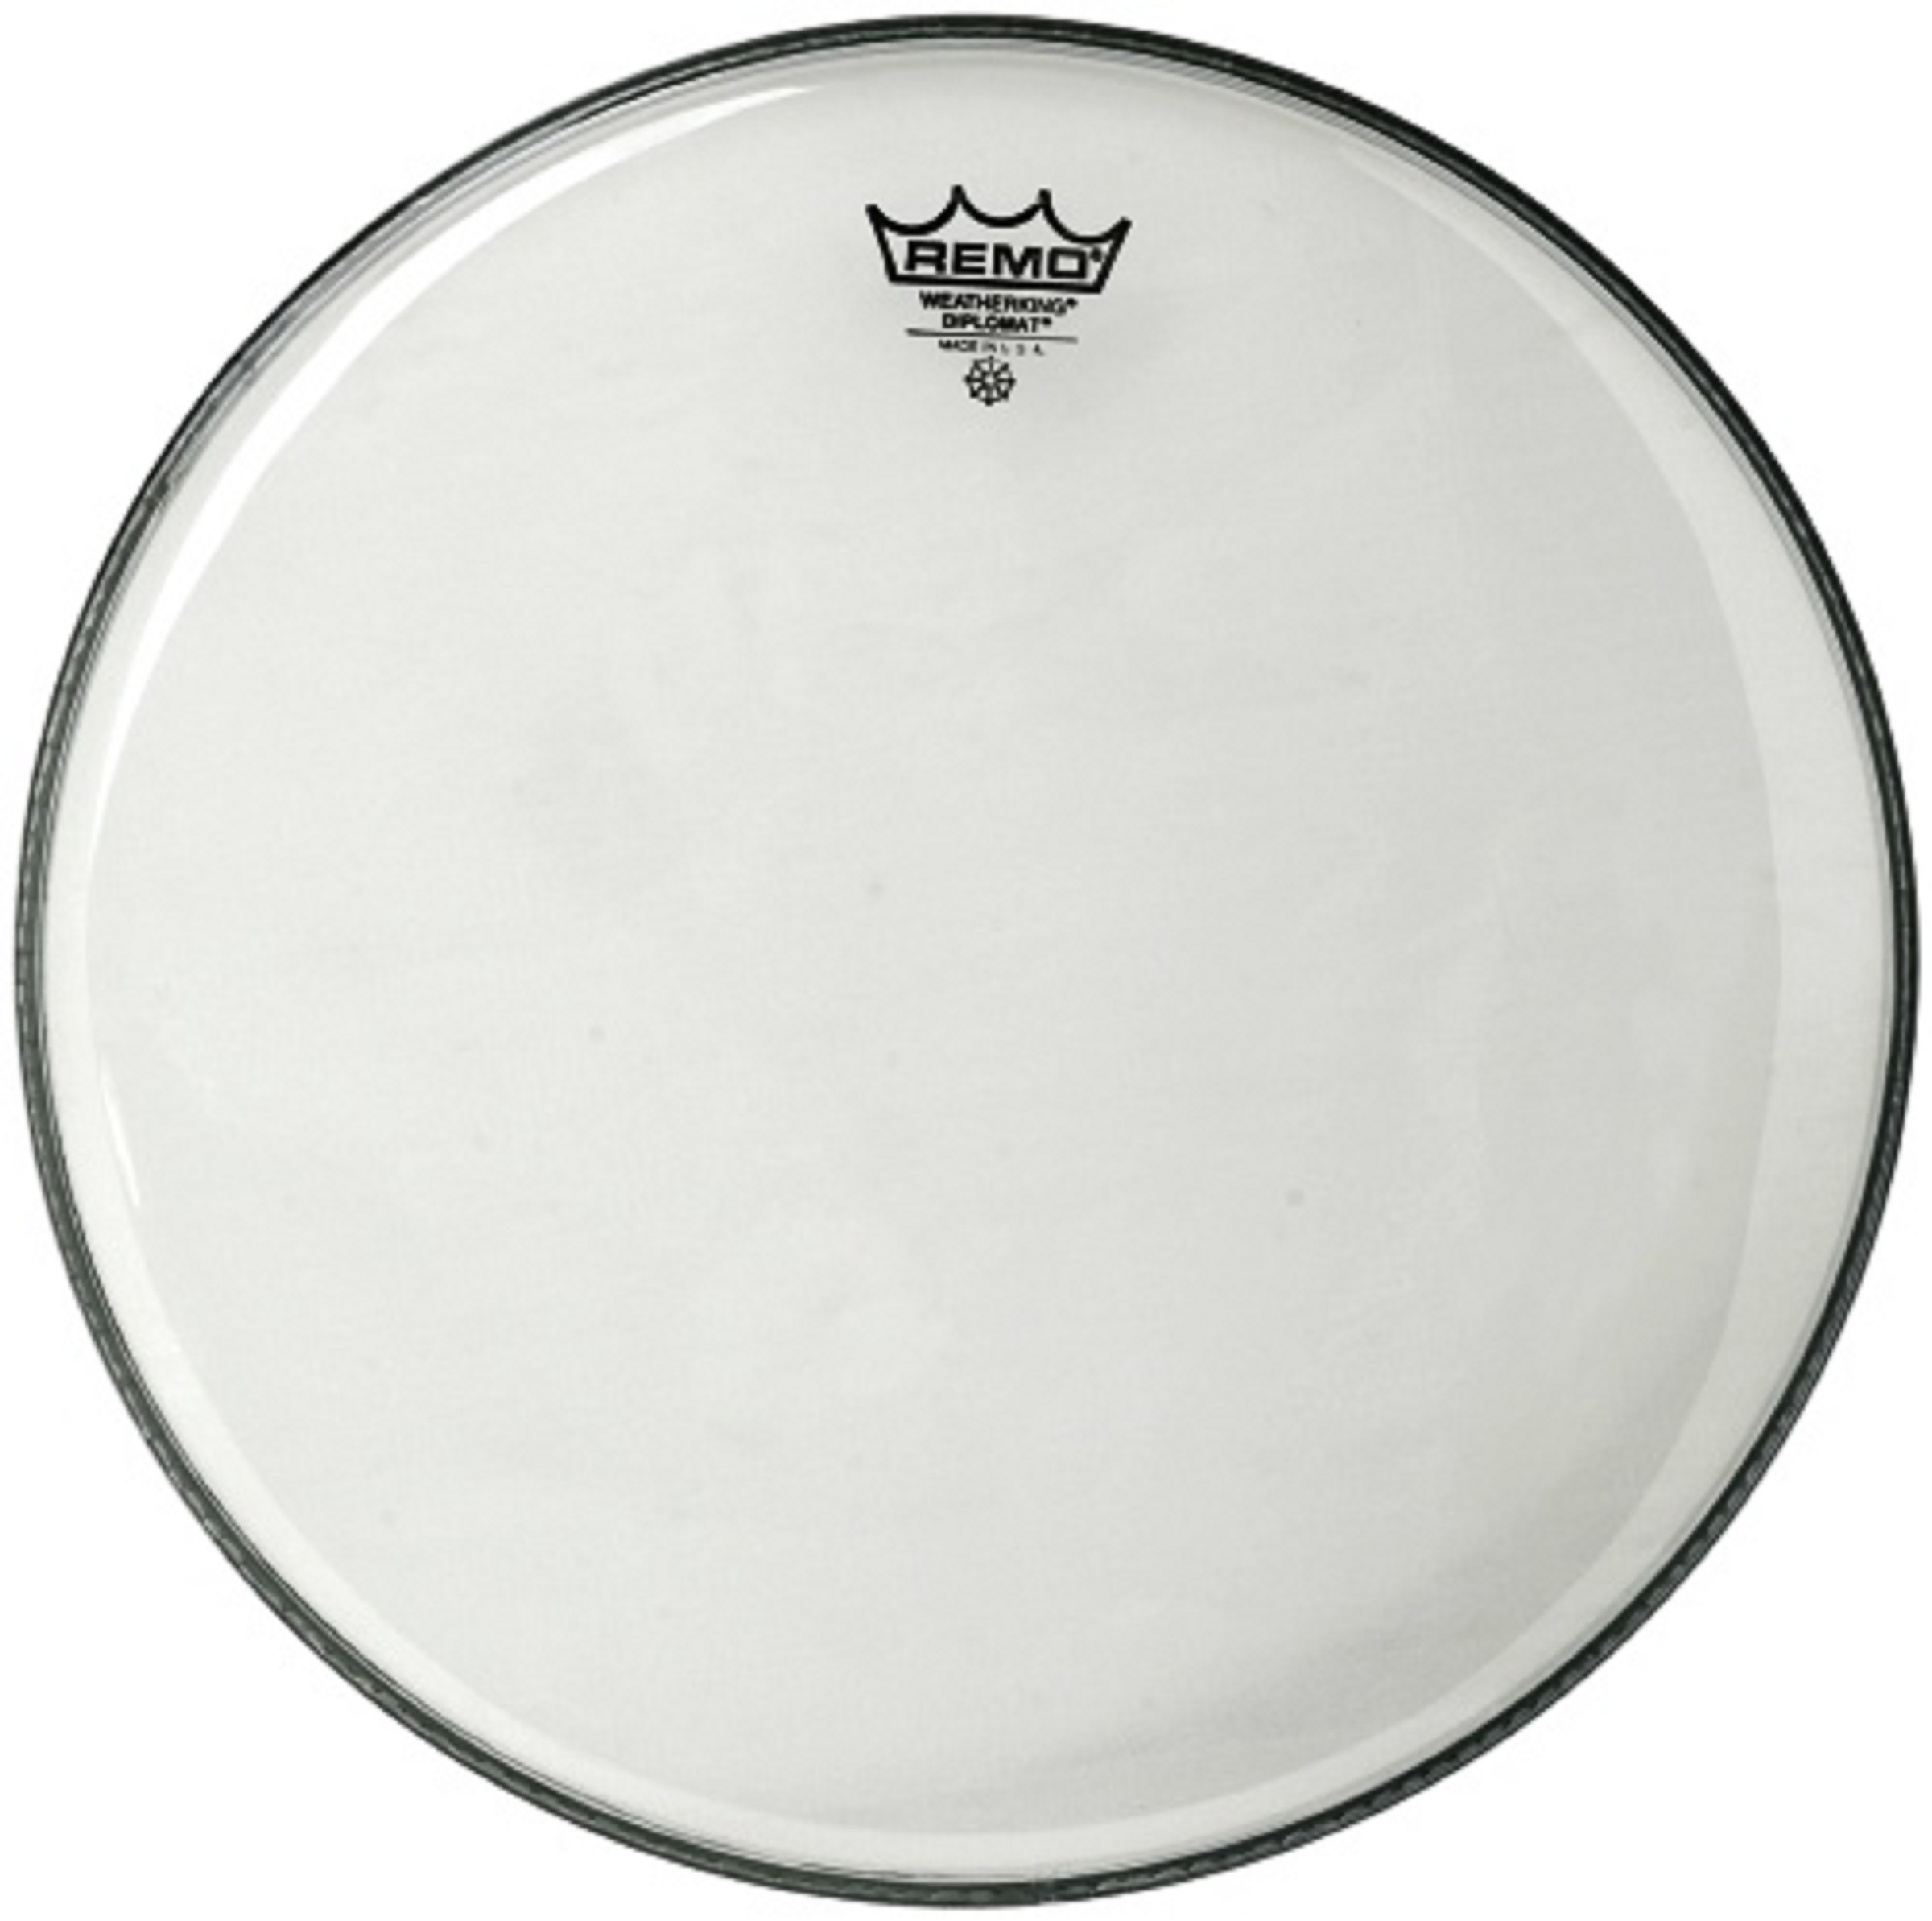 Remo Fell Diplomat 13" Clear